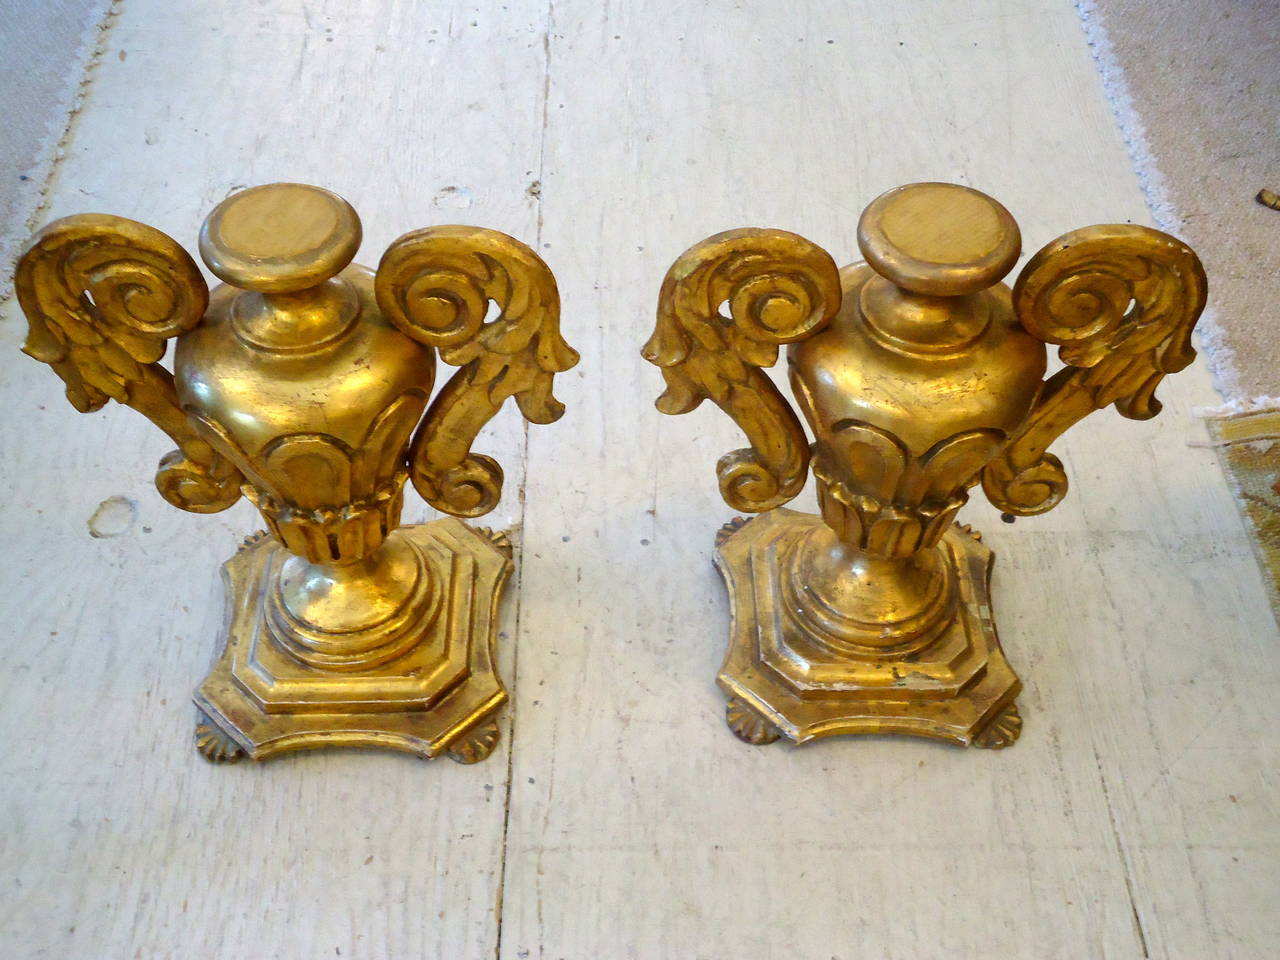 Two symmetrical and dramatic gold leafed, carved wood, urn shaped objects sitting on feet. Made in Italy. Tony Duquette flair!